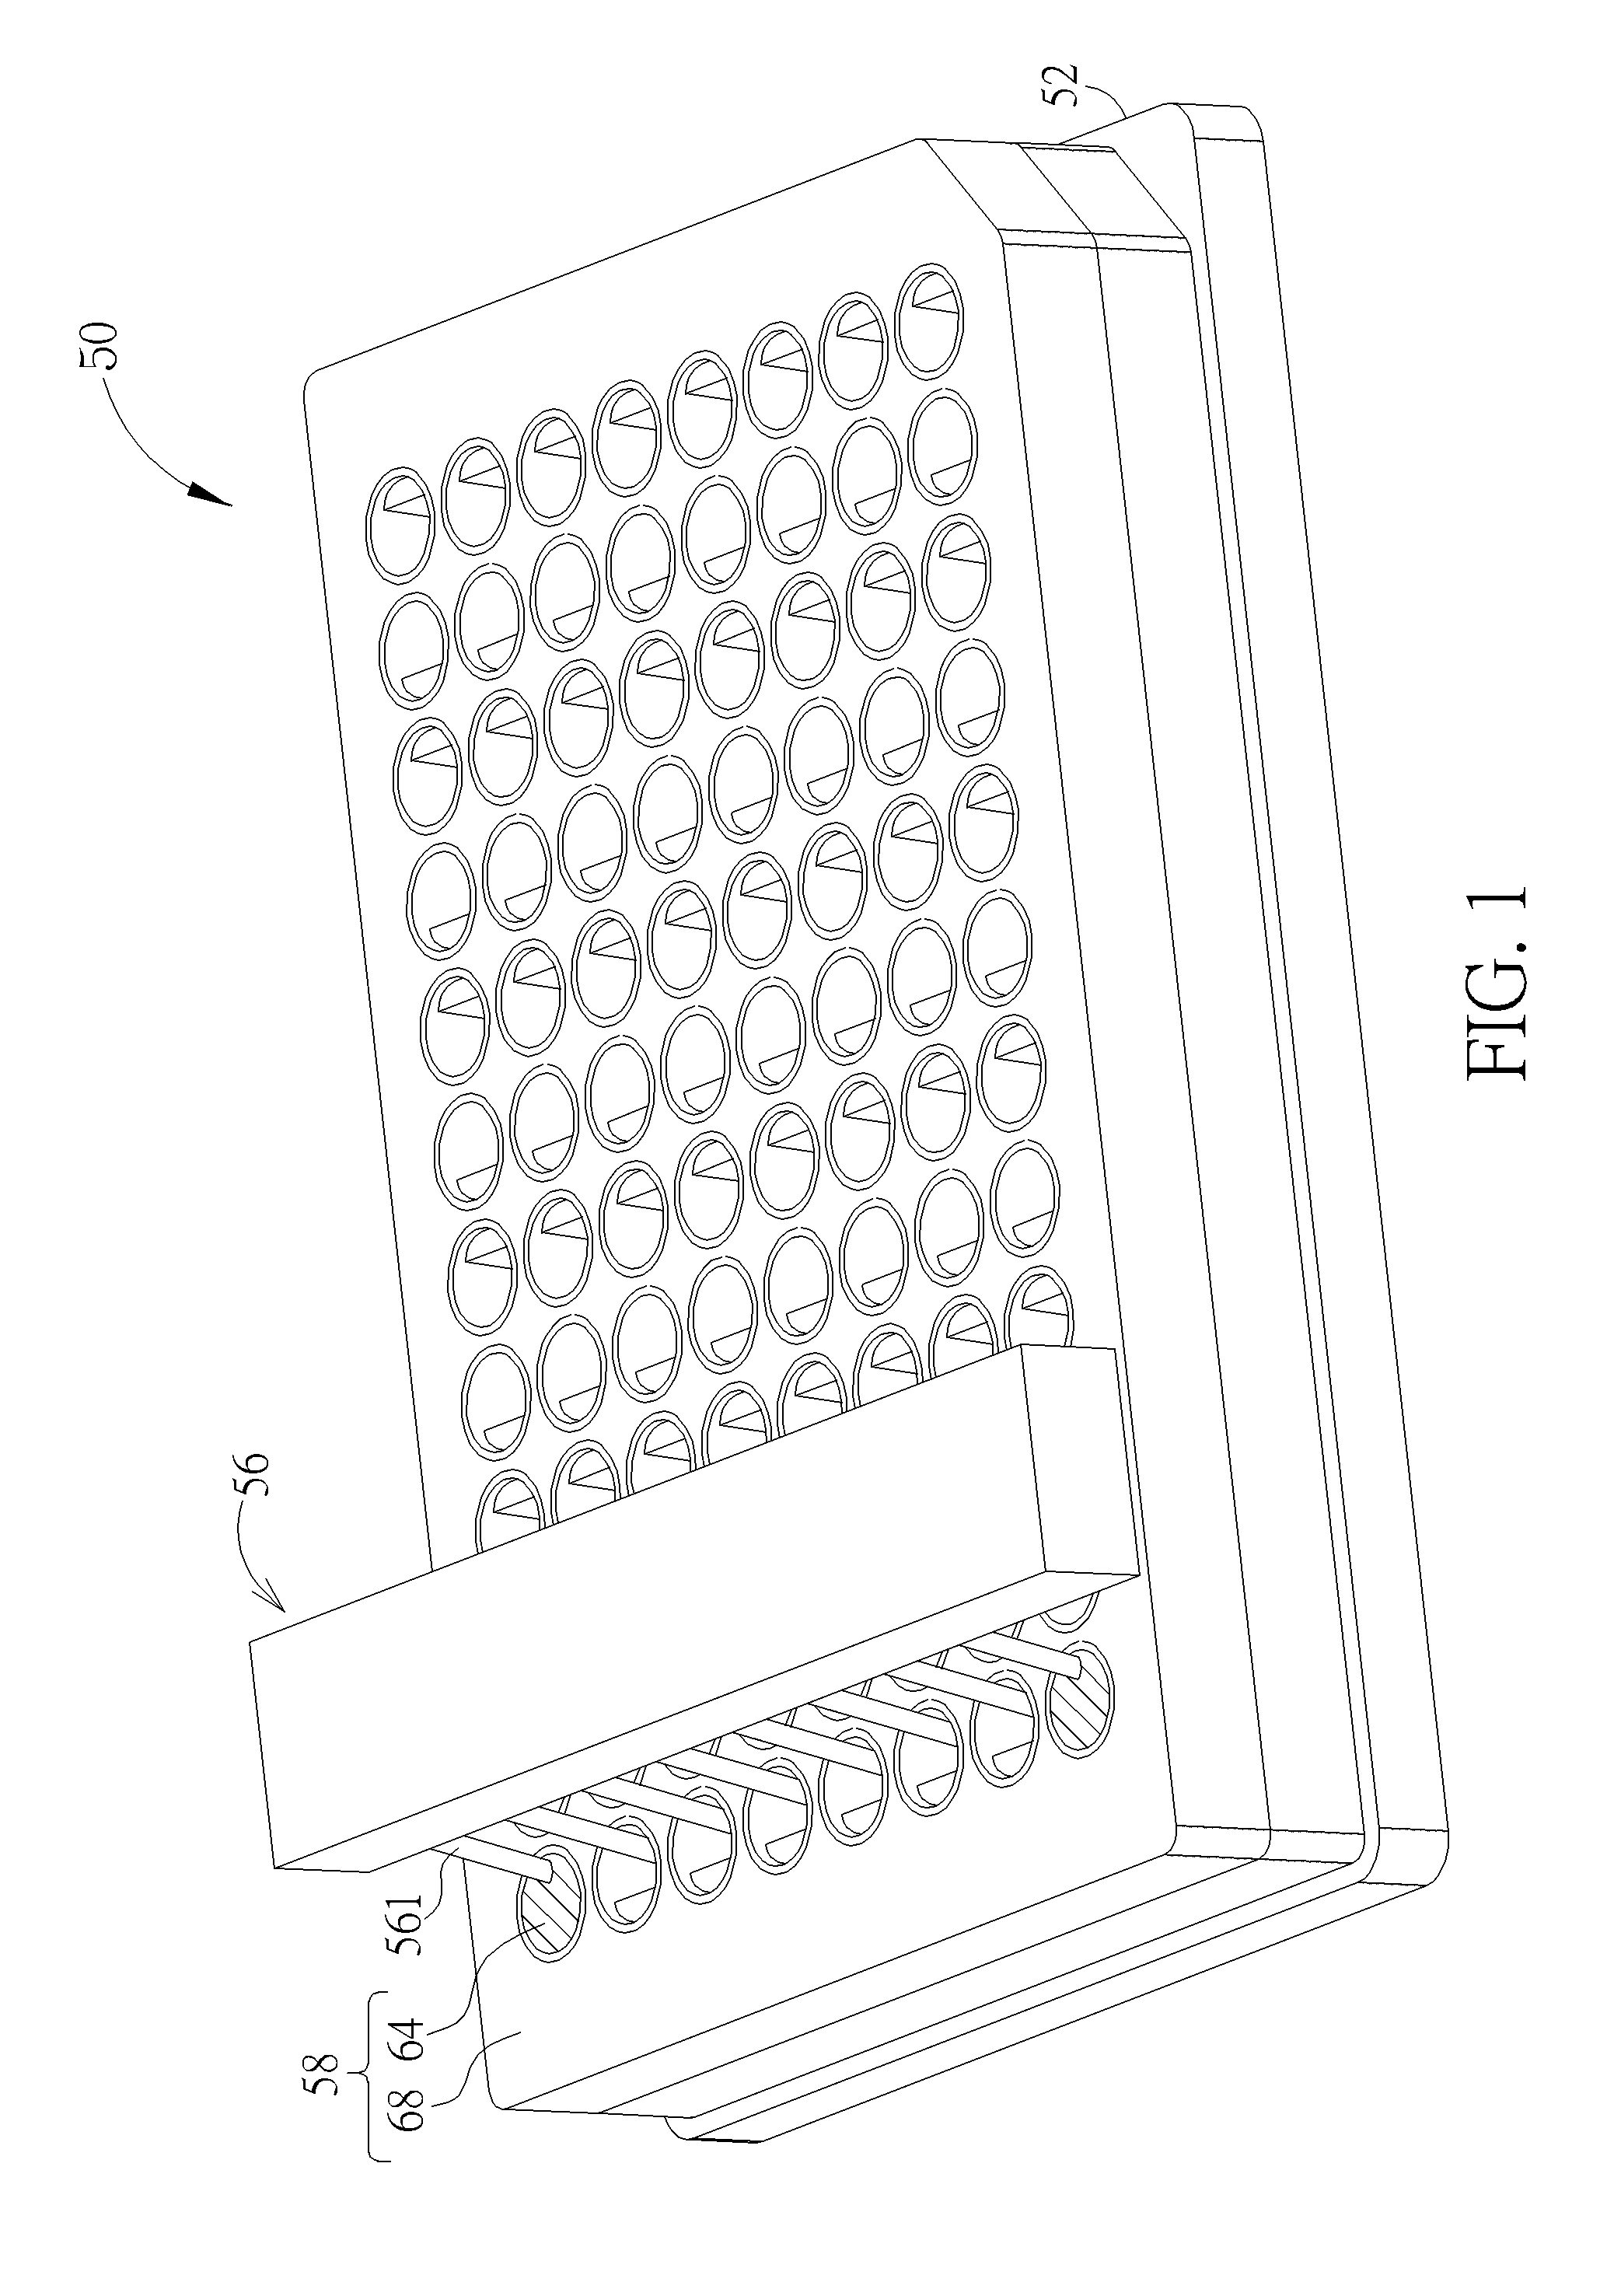 Guiding device for guiding a despenser to draw solution from at least one well on a microplate